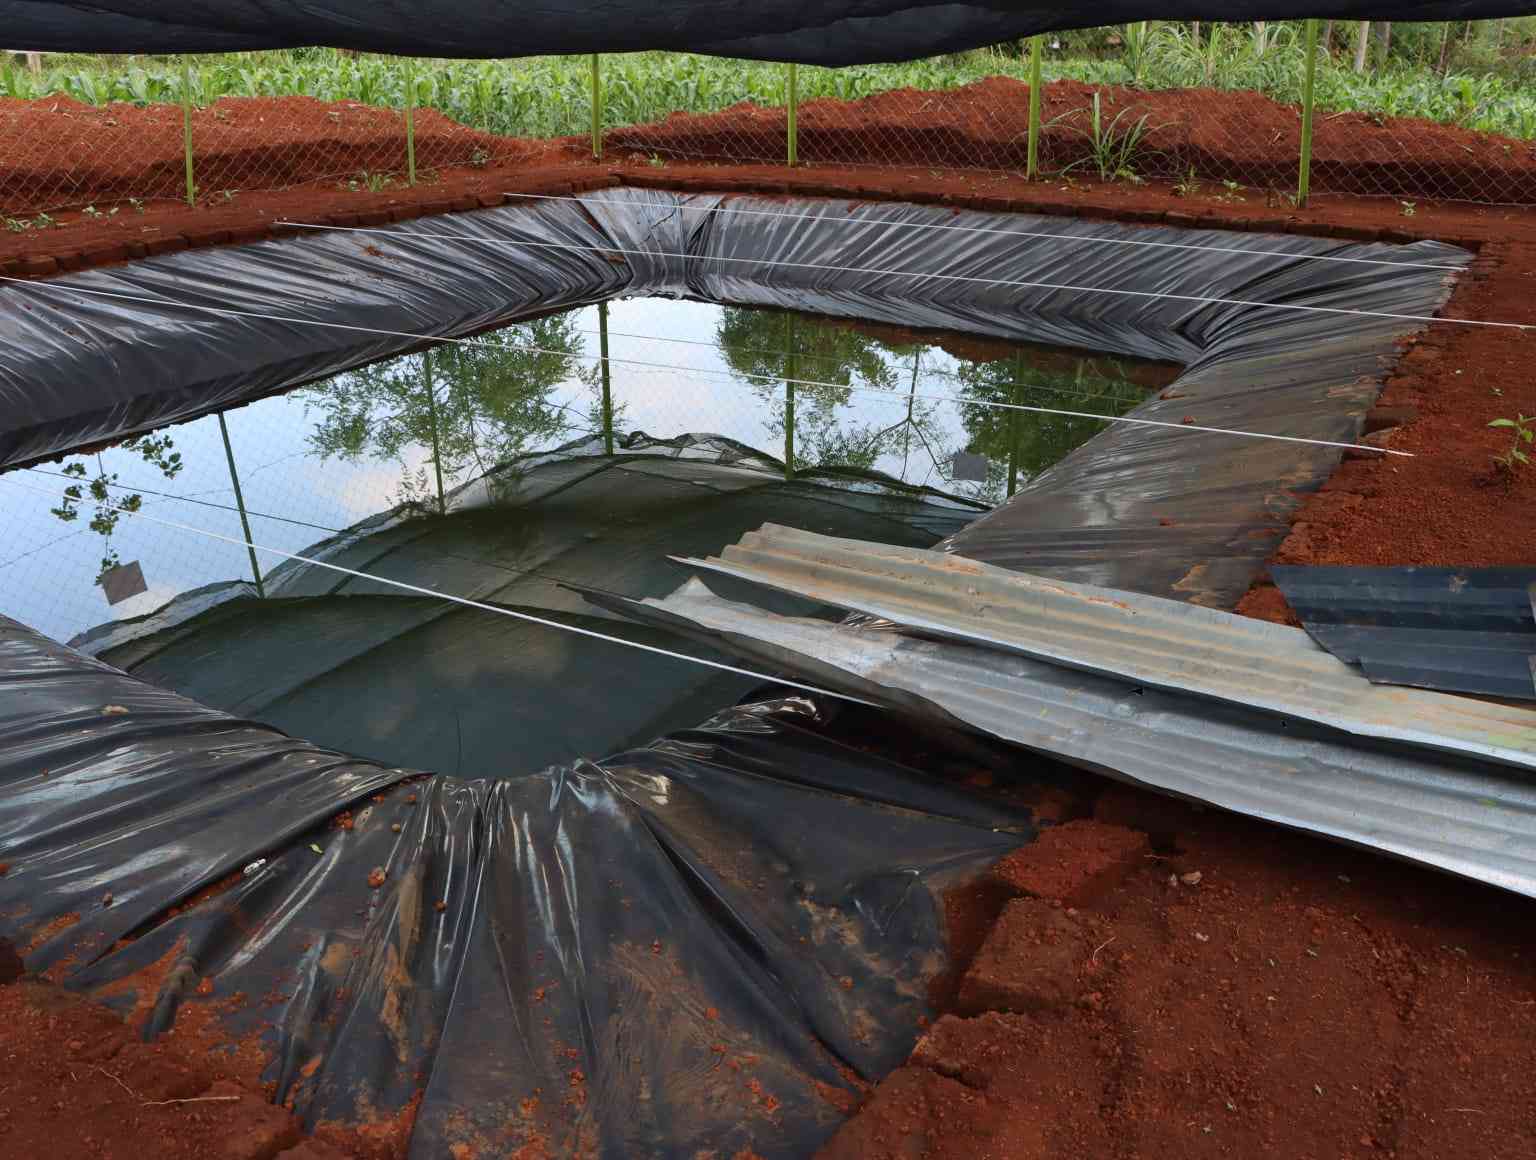 Water harvesting technology from house roofs to water pans